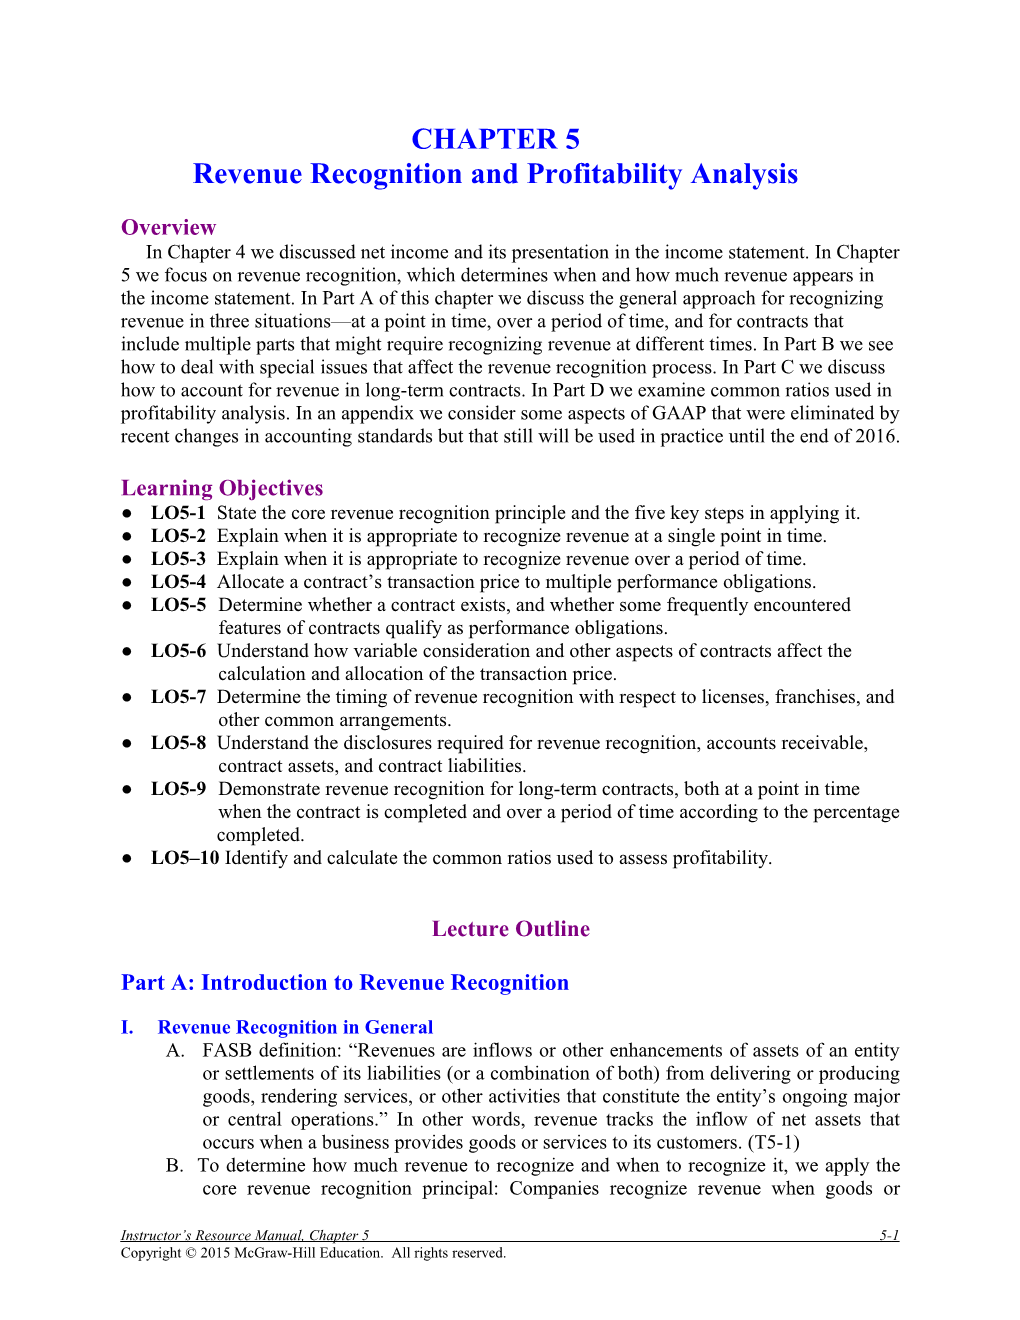 Revenue Recognition and Profitability Analysis